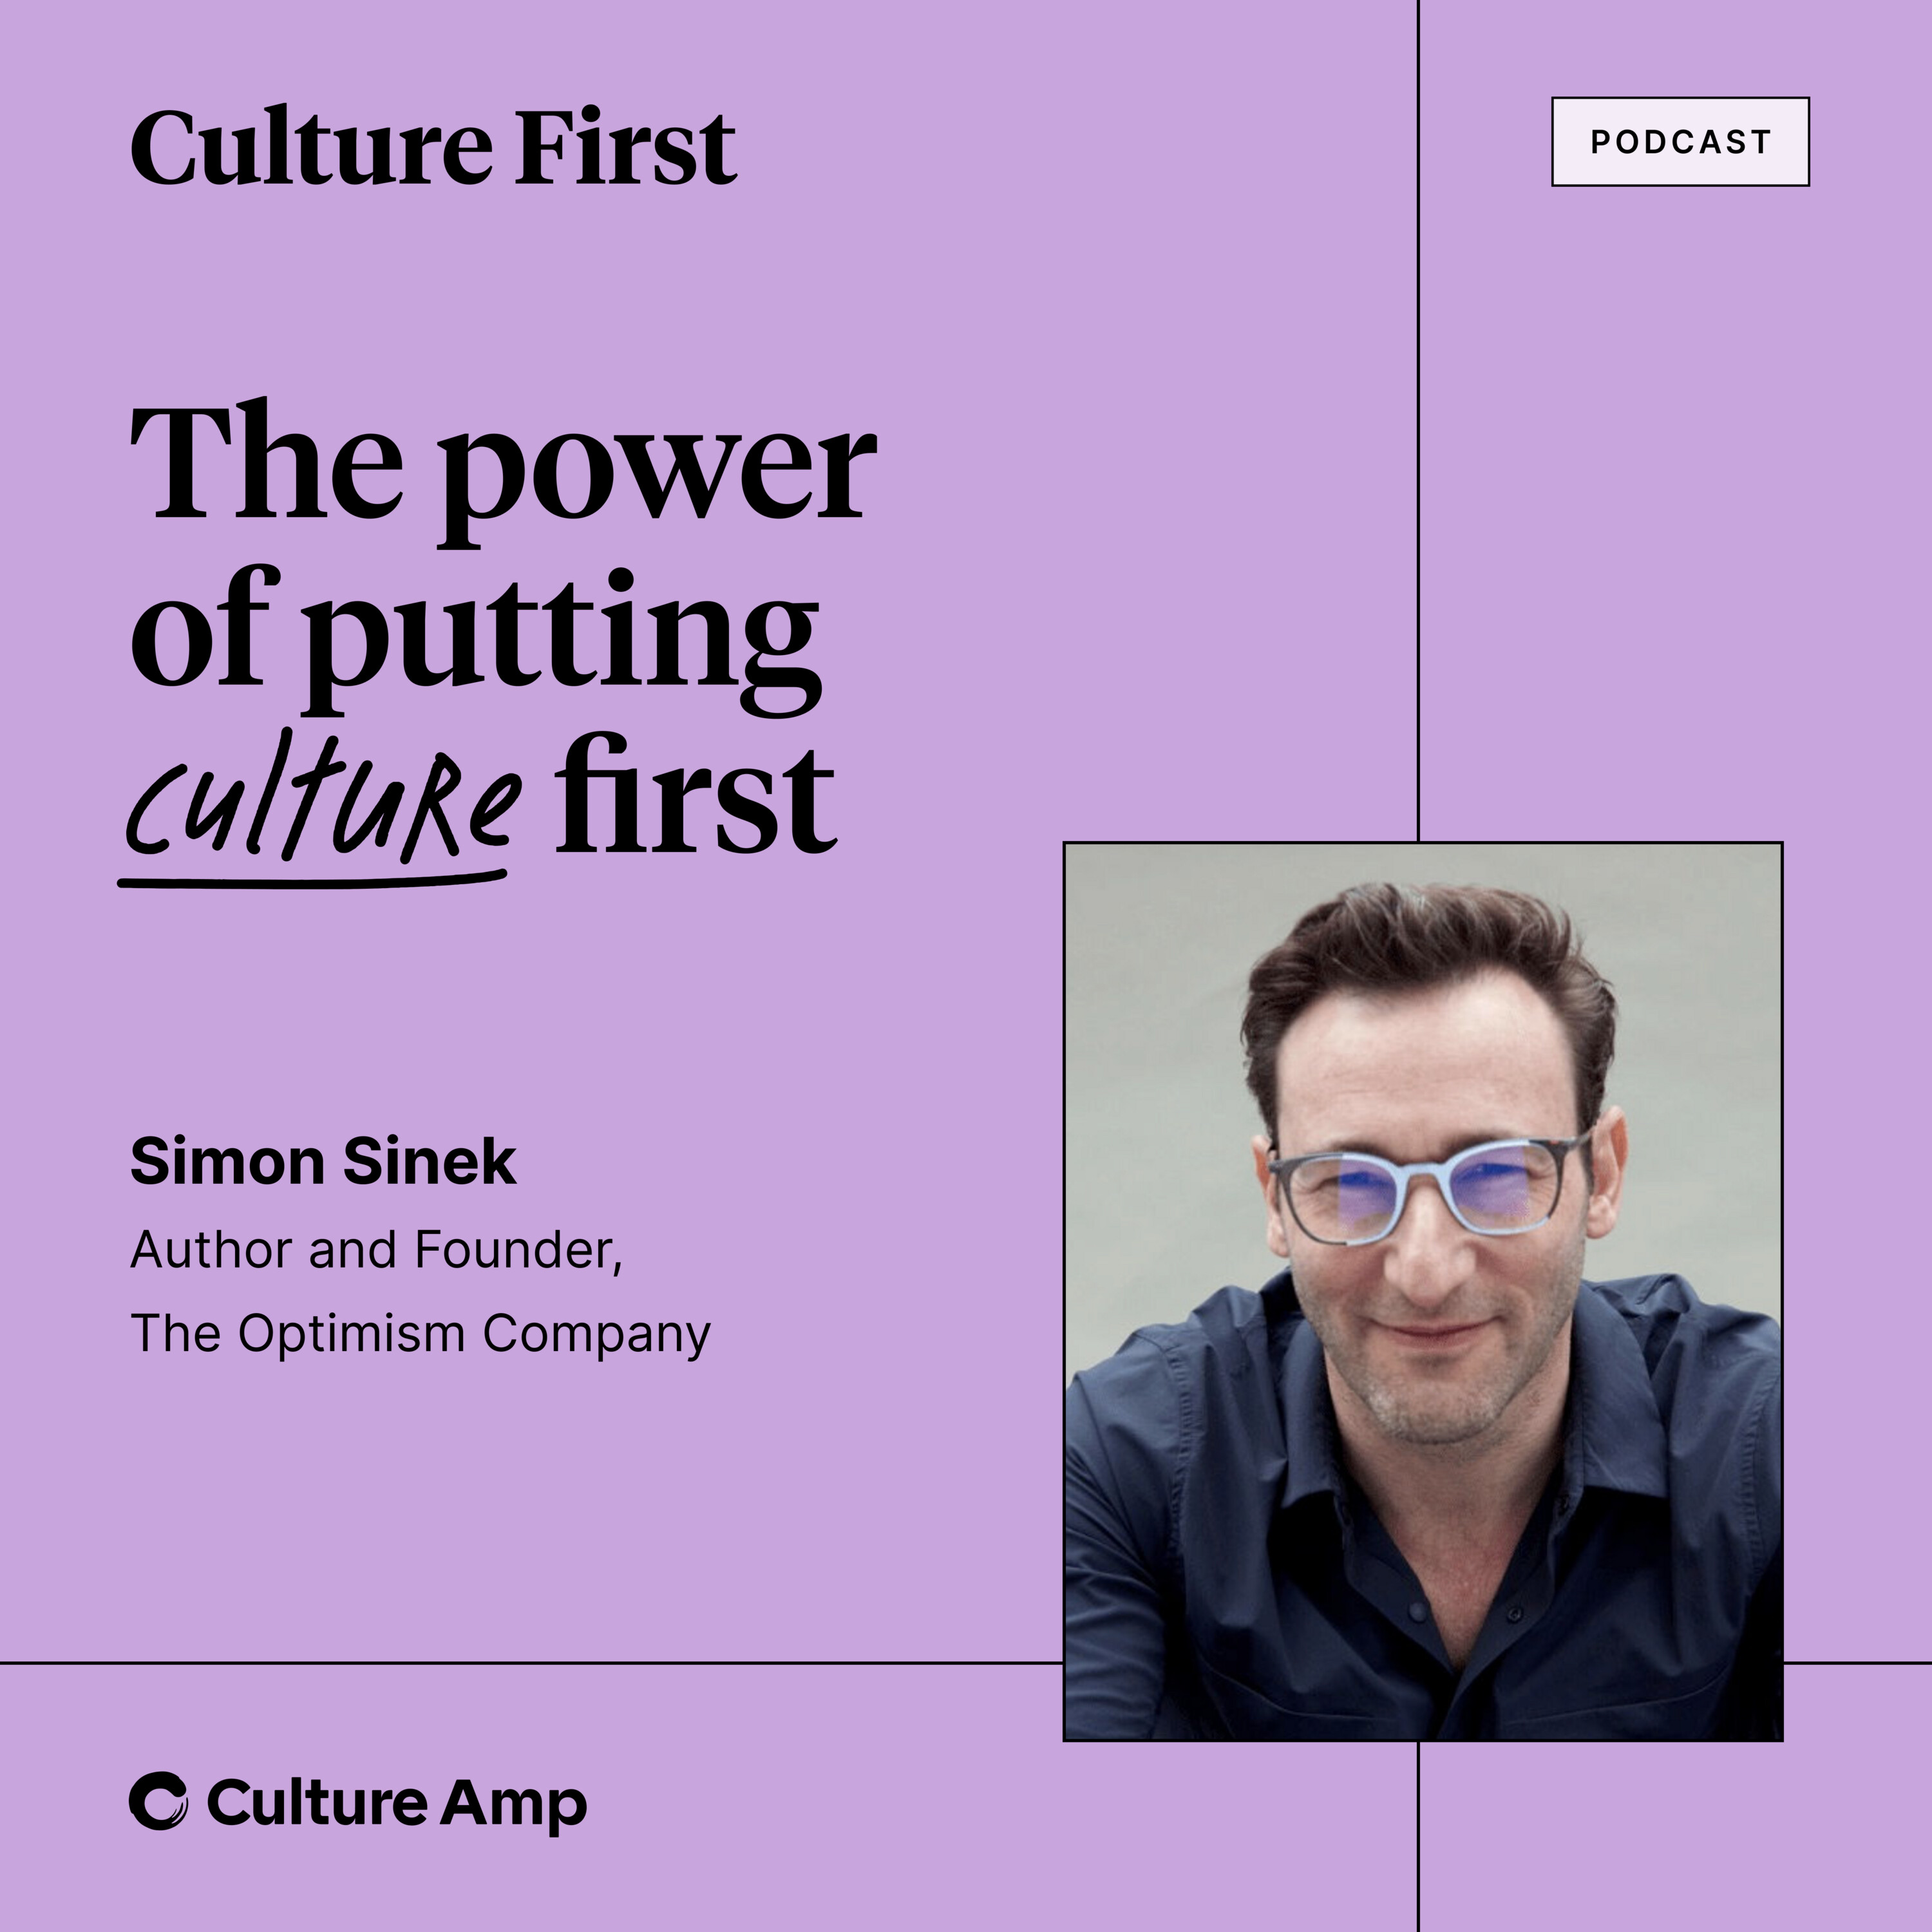 Simon Sinek on the power of putting culture first